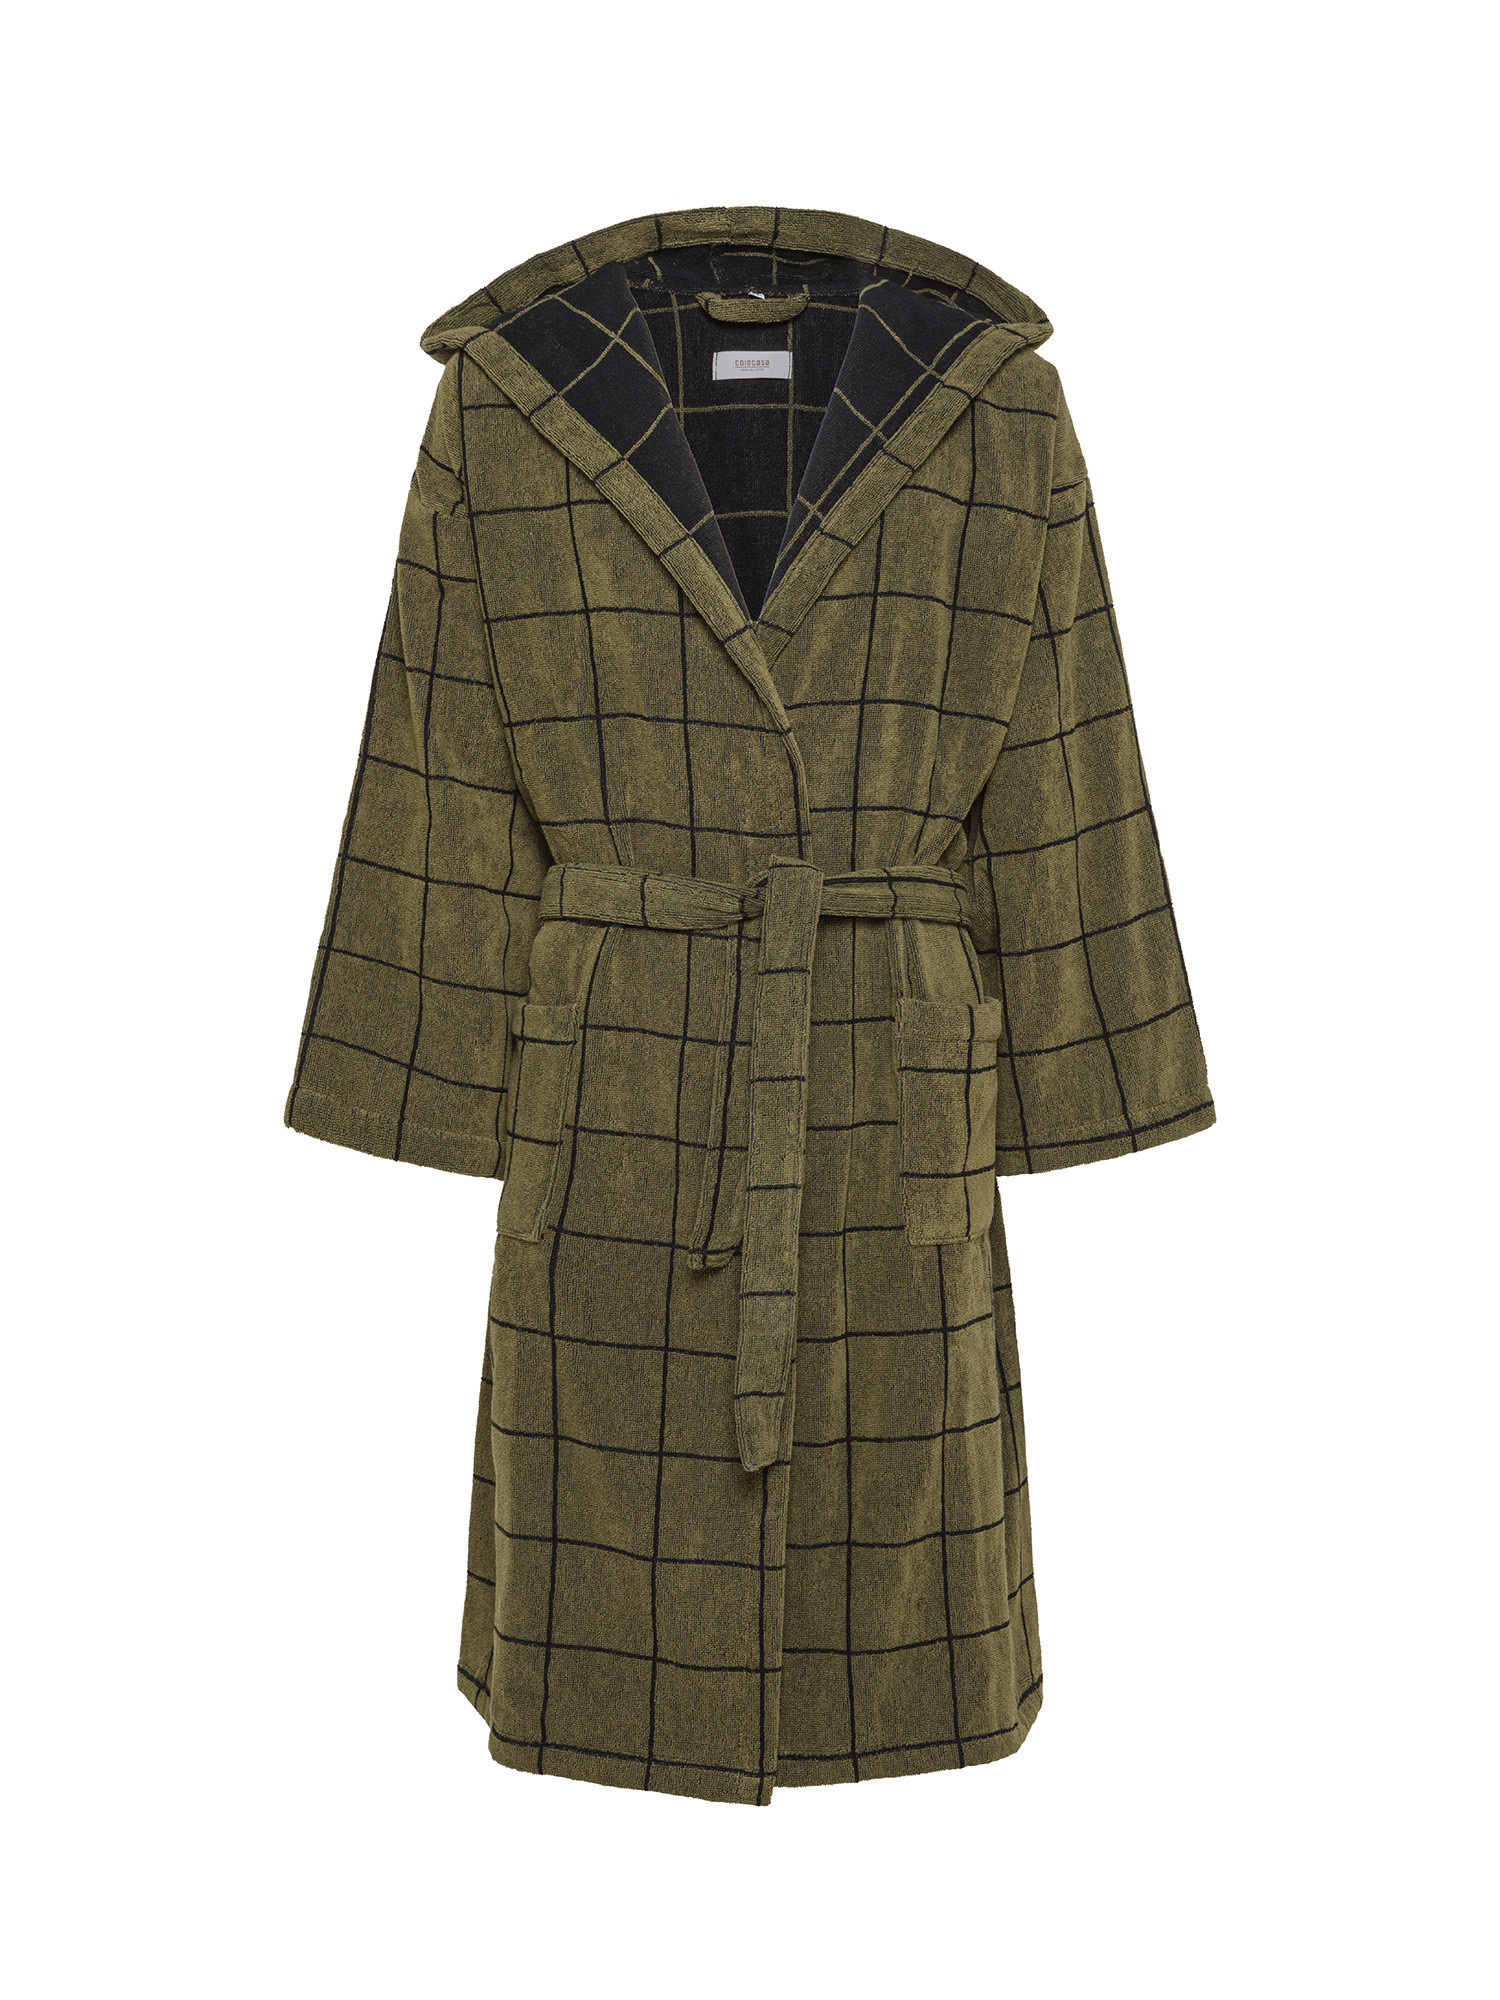 Bathrobe with hood in checked jacquard pure cotton terry, Green, large image number 0